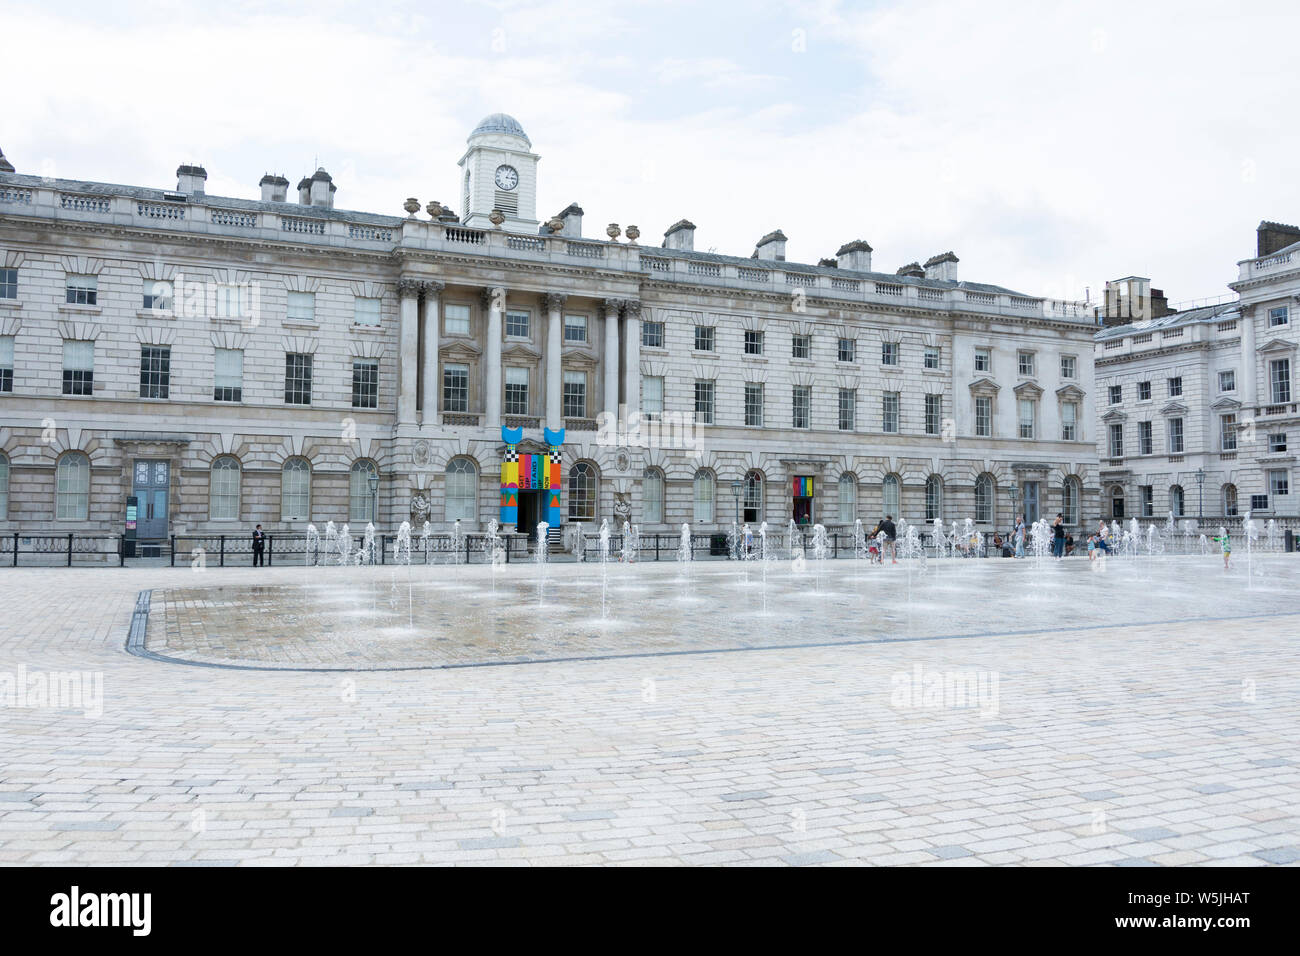 Water fountains in the  neoclassical Somerset House Courtyard, London, England, UK Stock Photo